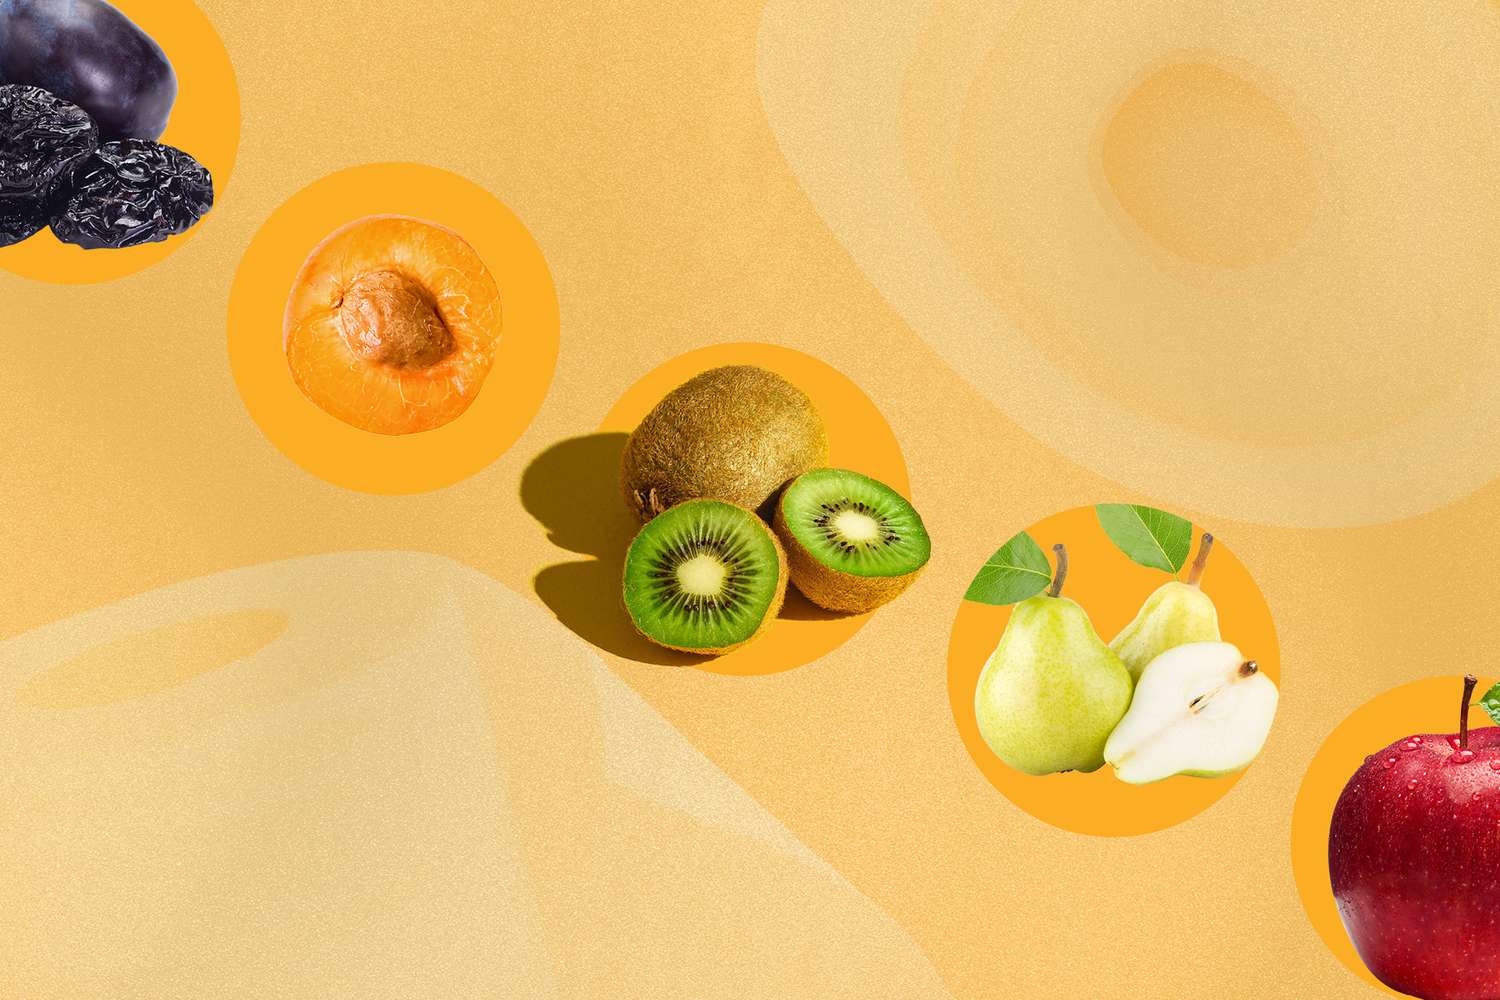 kiwis, pears, apple, prunes and apricot inside circles with toilet and toilet paper background